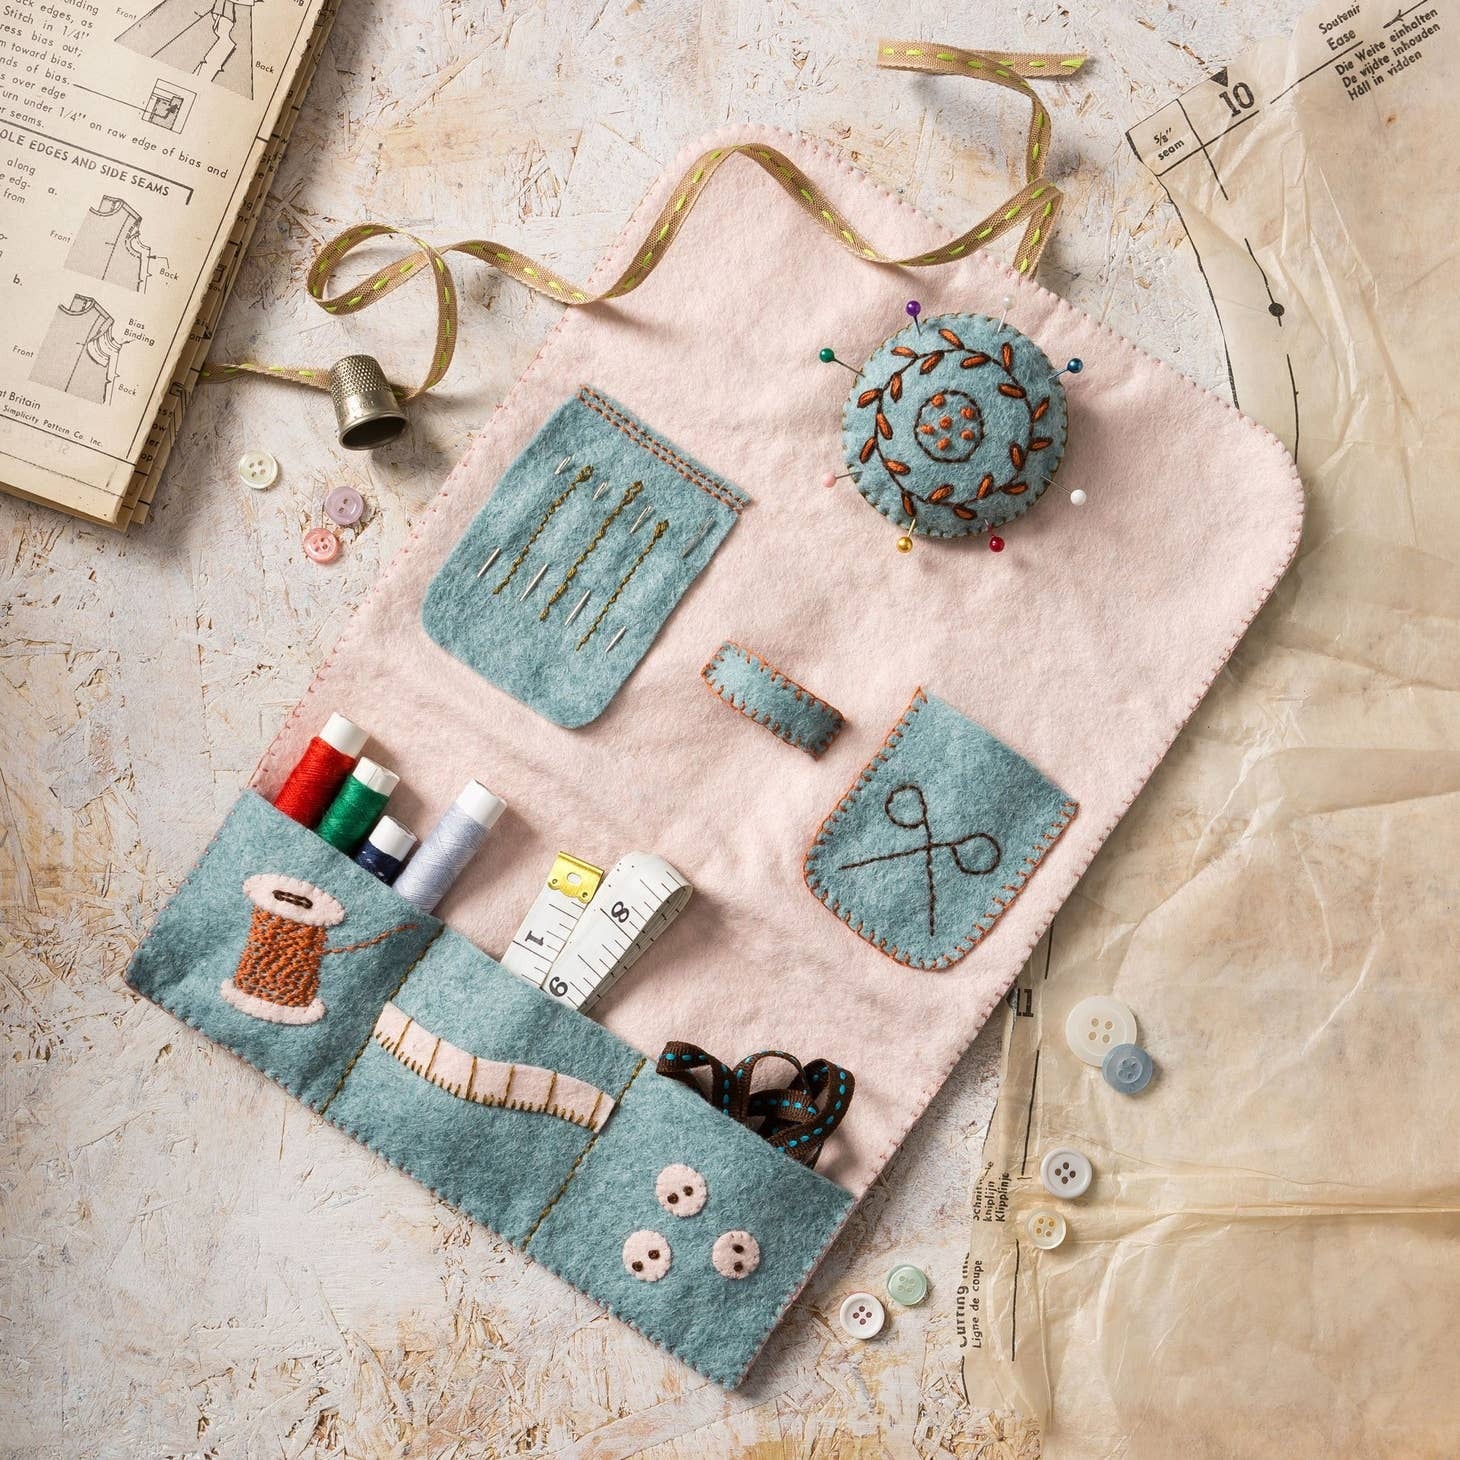 Handcrafted pastel sewing roll kit laid out on a vintage background, showcasing pockets filled with colorful threads, buttons, a tape measure, and a detachable embroidered pin cushion, all bound together with a charming gingham ribbon.